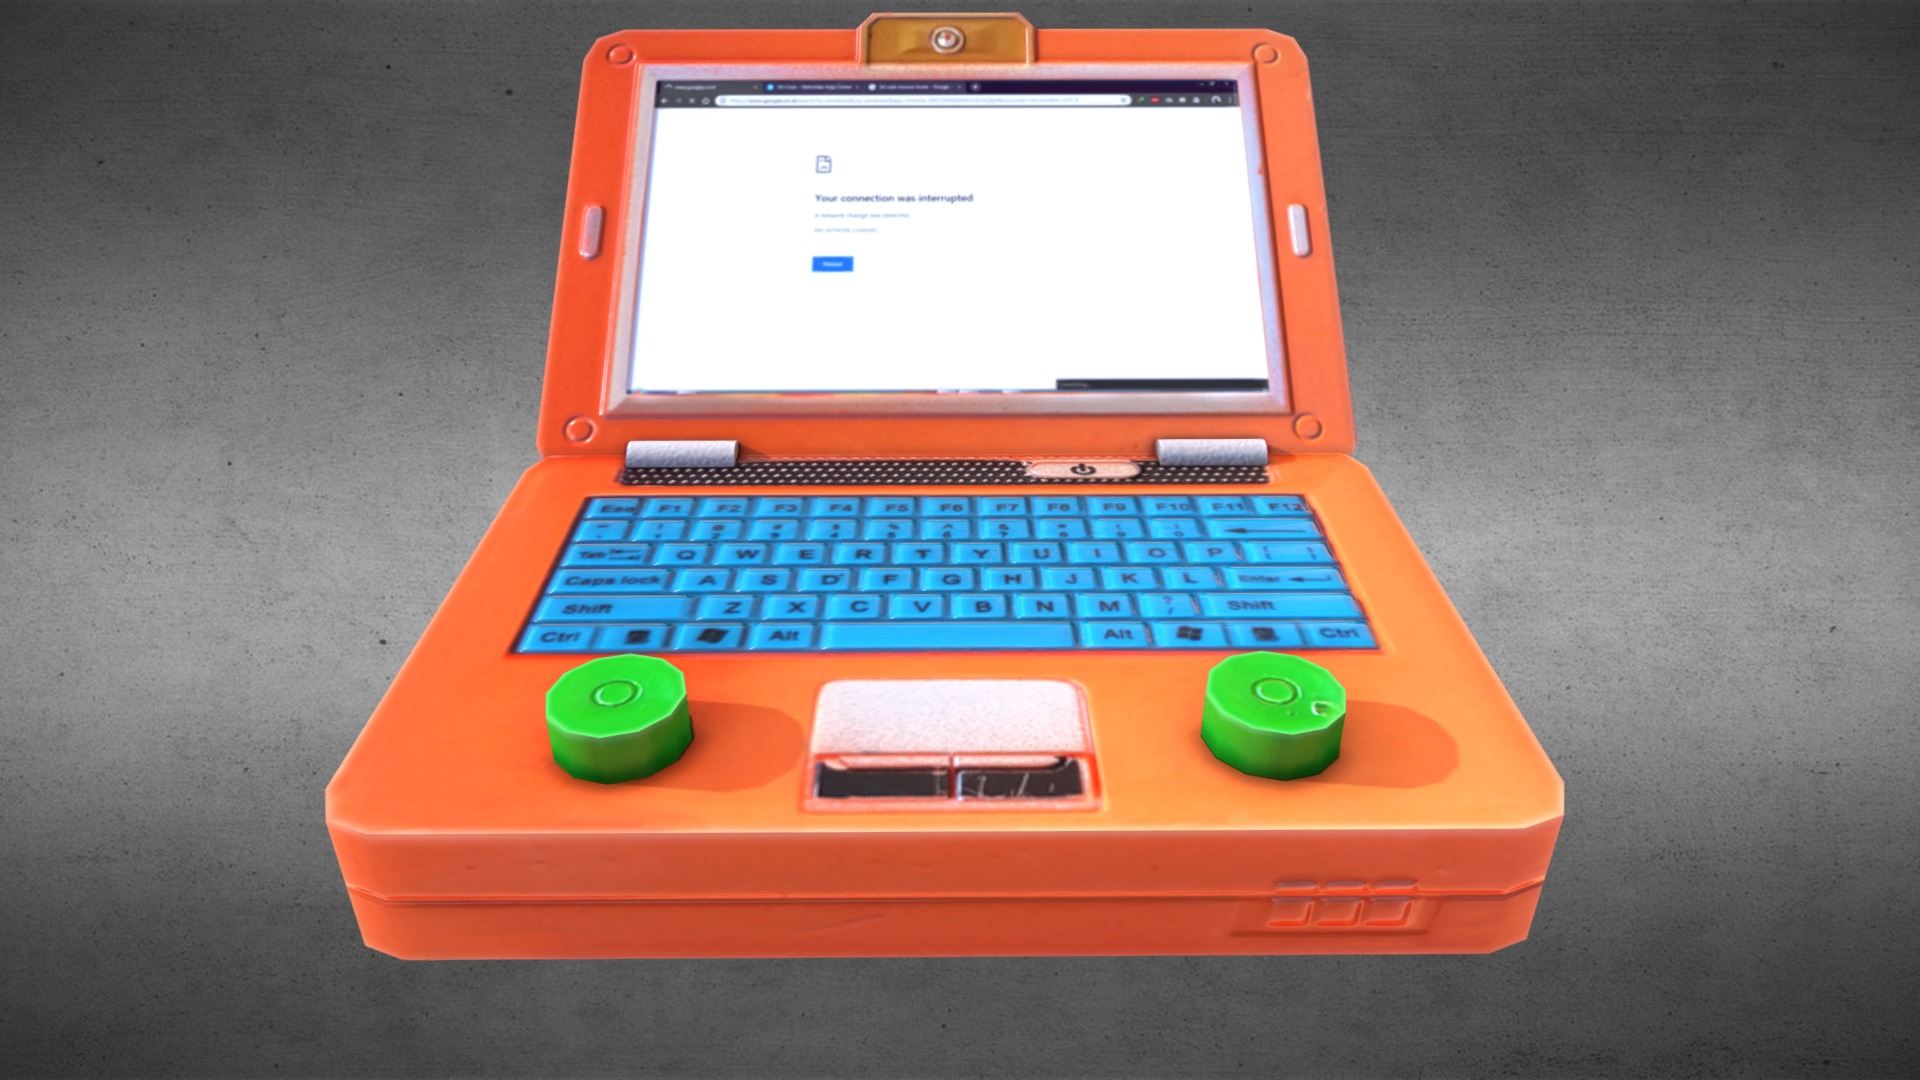 3D model Laptoys Lowpoly - This is a 3D model of the Laptoys Lowpoly. The 3D model is about an orange laptop with a keyboard.